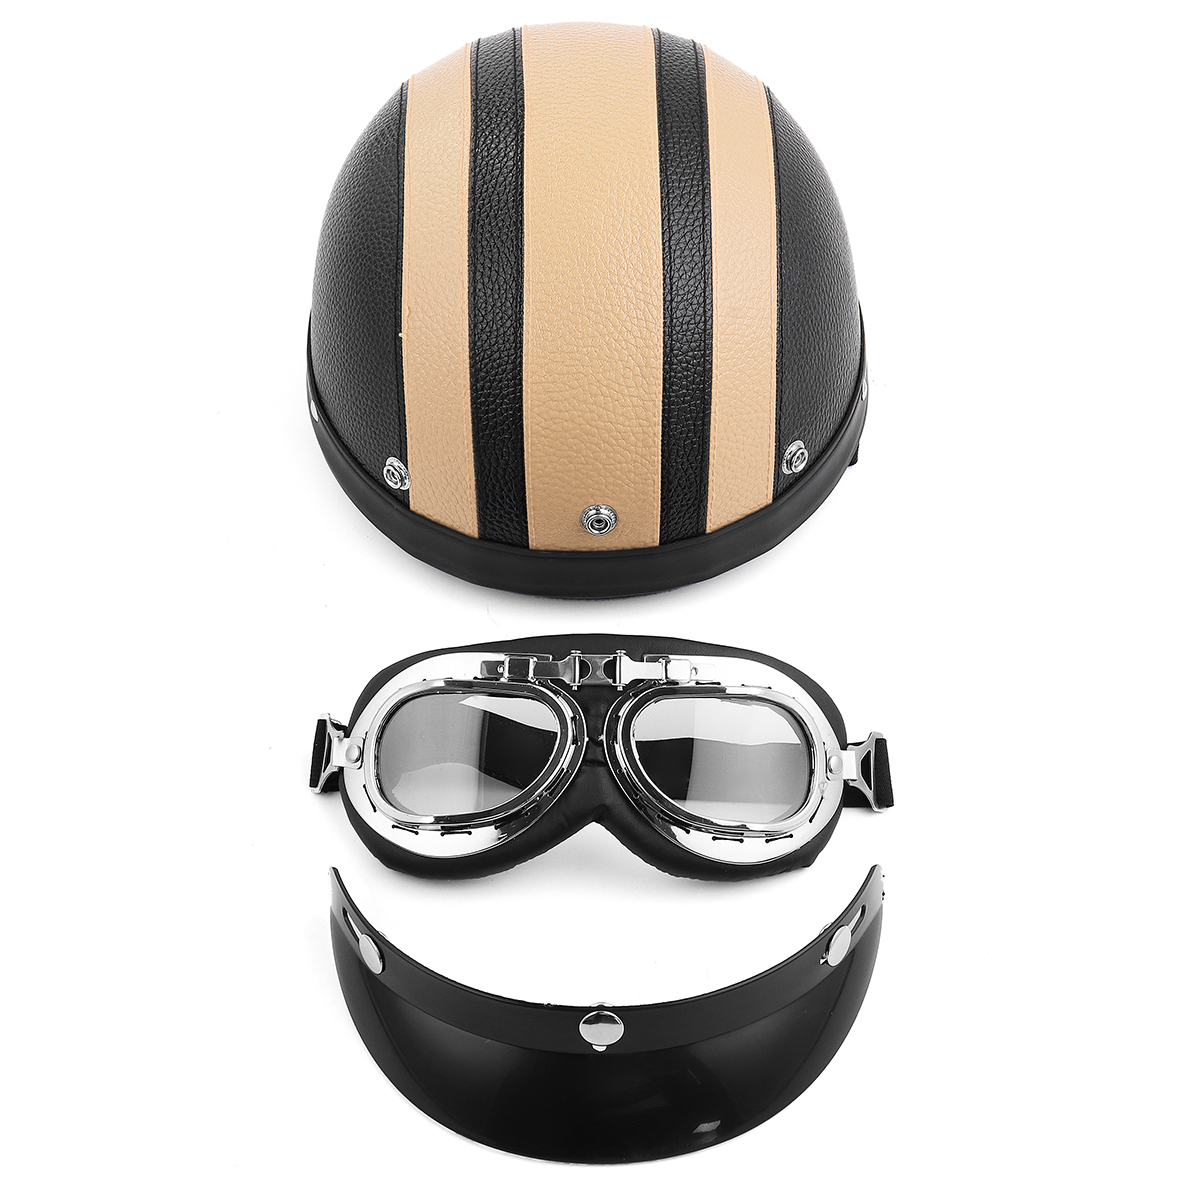 Full Face Motorcycle Helmet with Sunglasses Sun Shield Scarf Colorful Motorbike